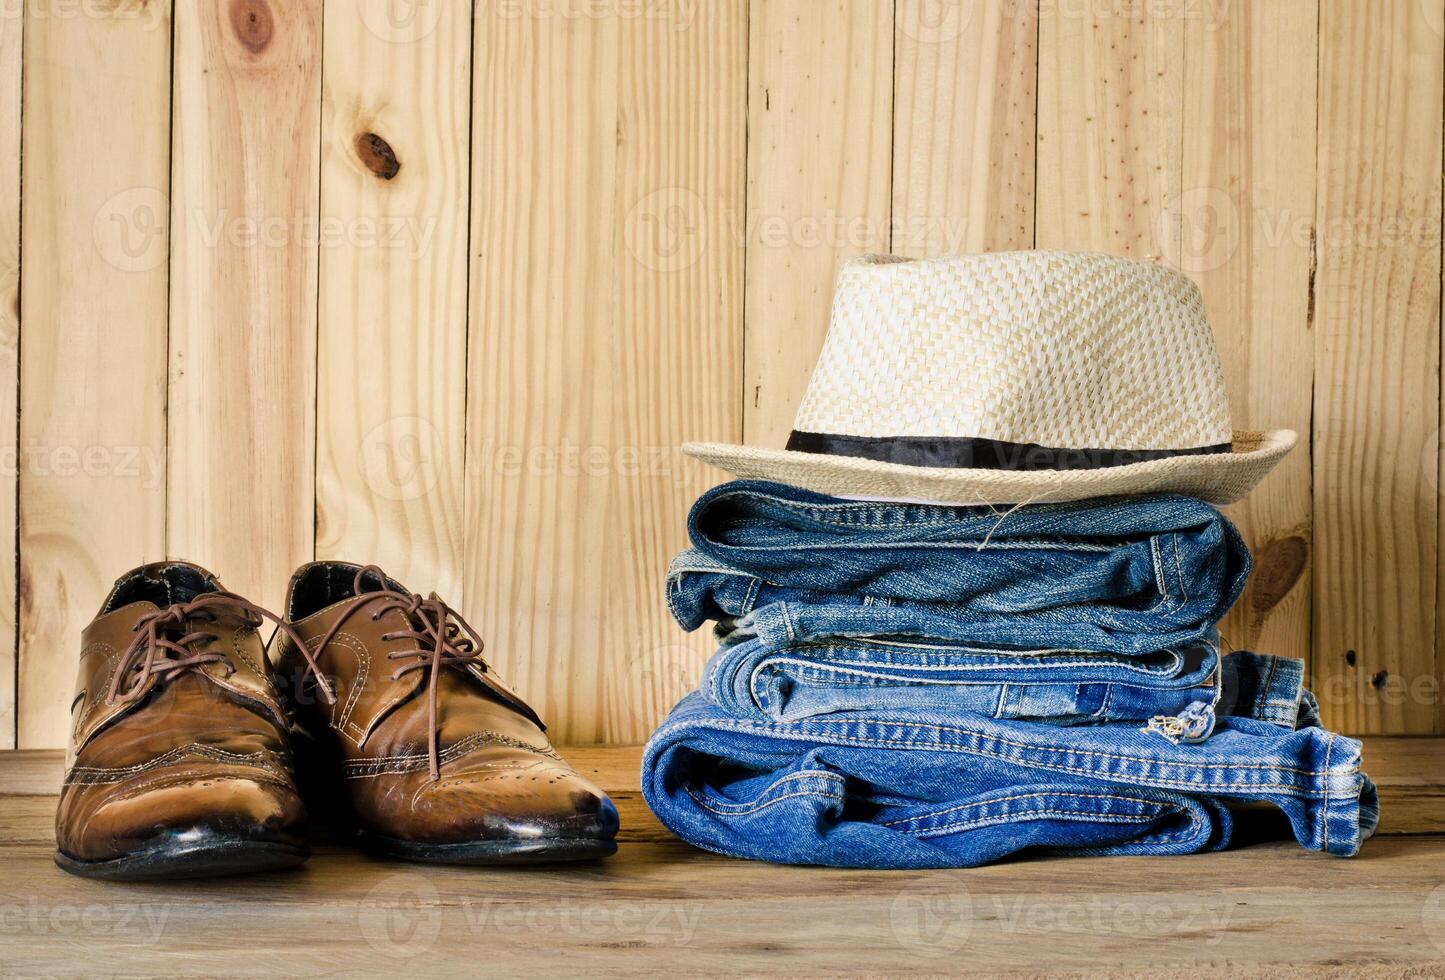 Travel,accessories, jeans, hats, shoes, ready for the trip on wooden backgrond photo